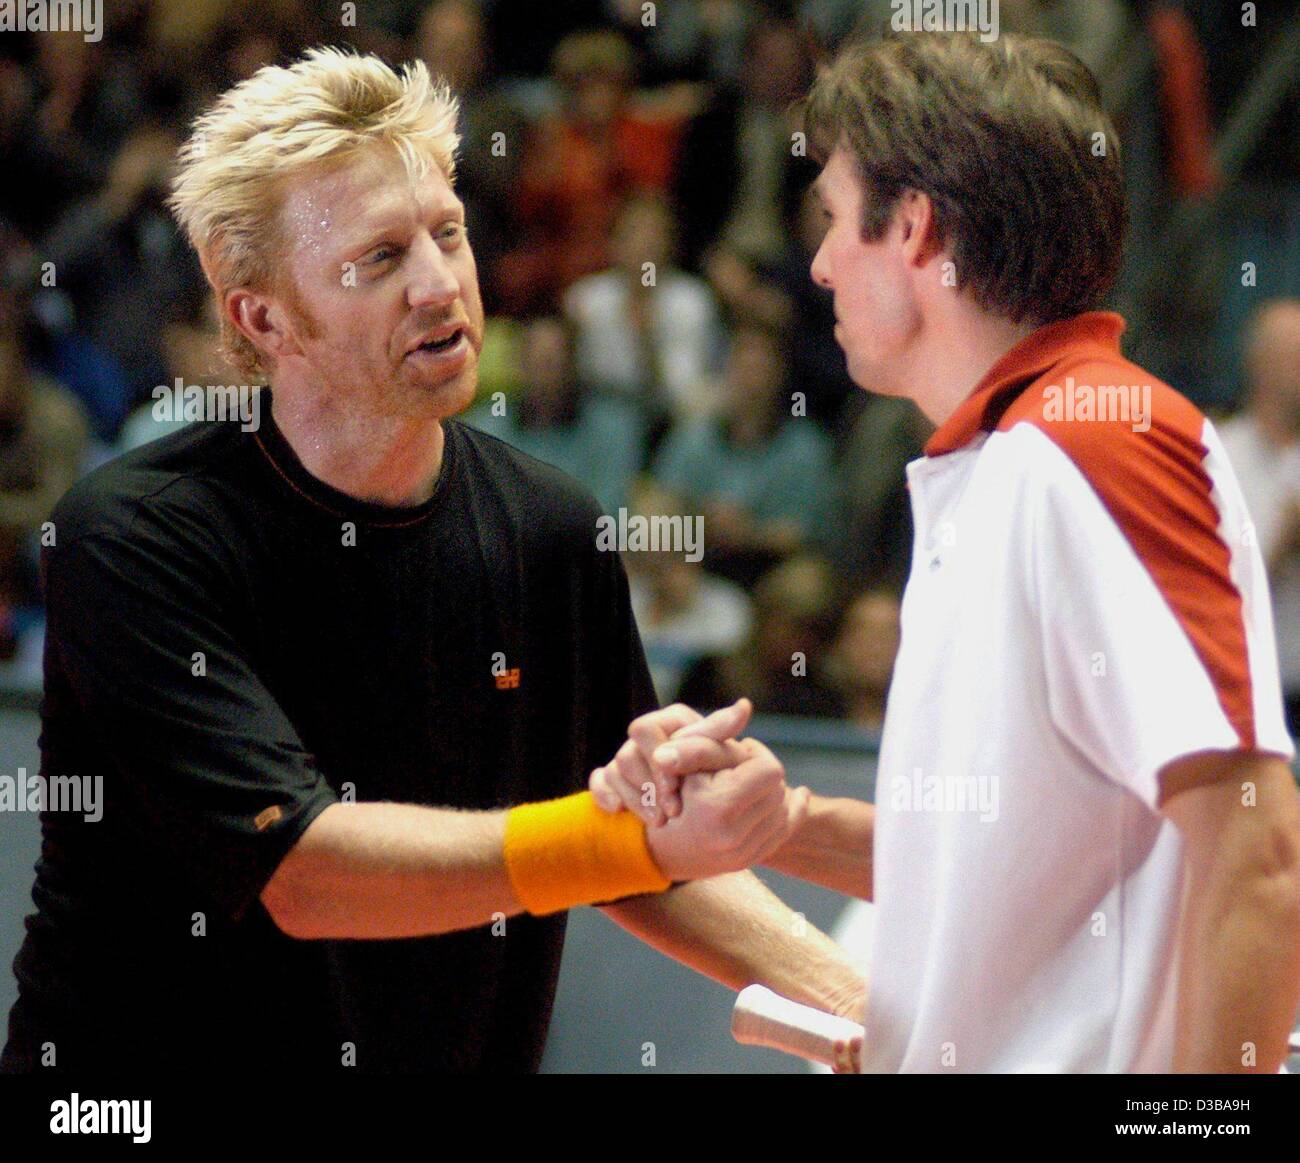 (dpa) - Boris Becker (L) congratulates winner Michael Stich after the semi final tennis match of the 'Delta Tour of Champions' in Frankfurt, 23 November 2002. Stich won in two sets 6-3 and 6-4. The night before, both had celebrated Becker's 35th birthday until the early morning. Stock Photo